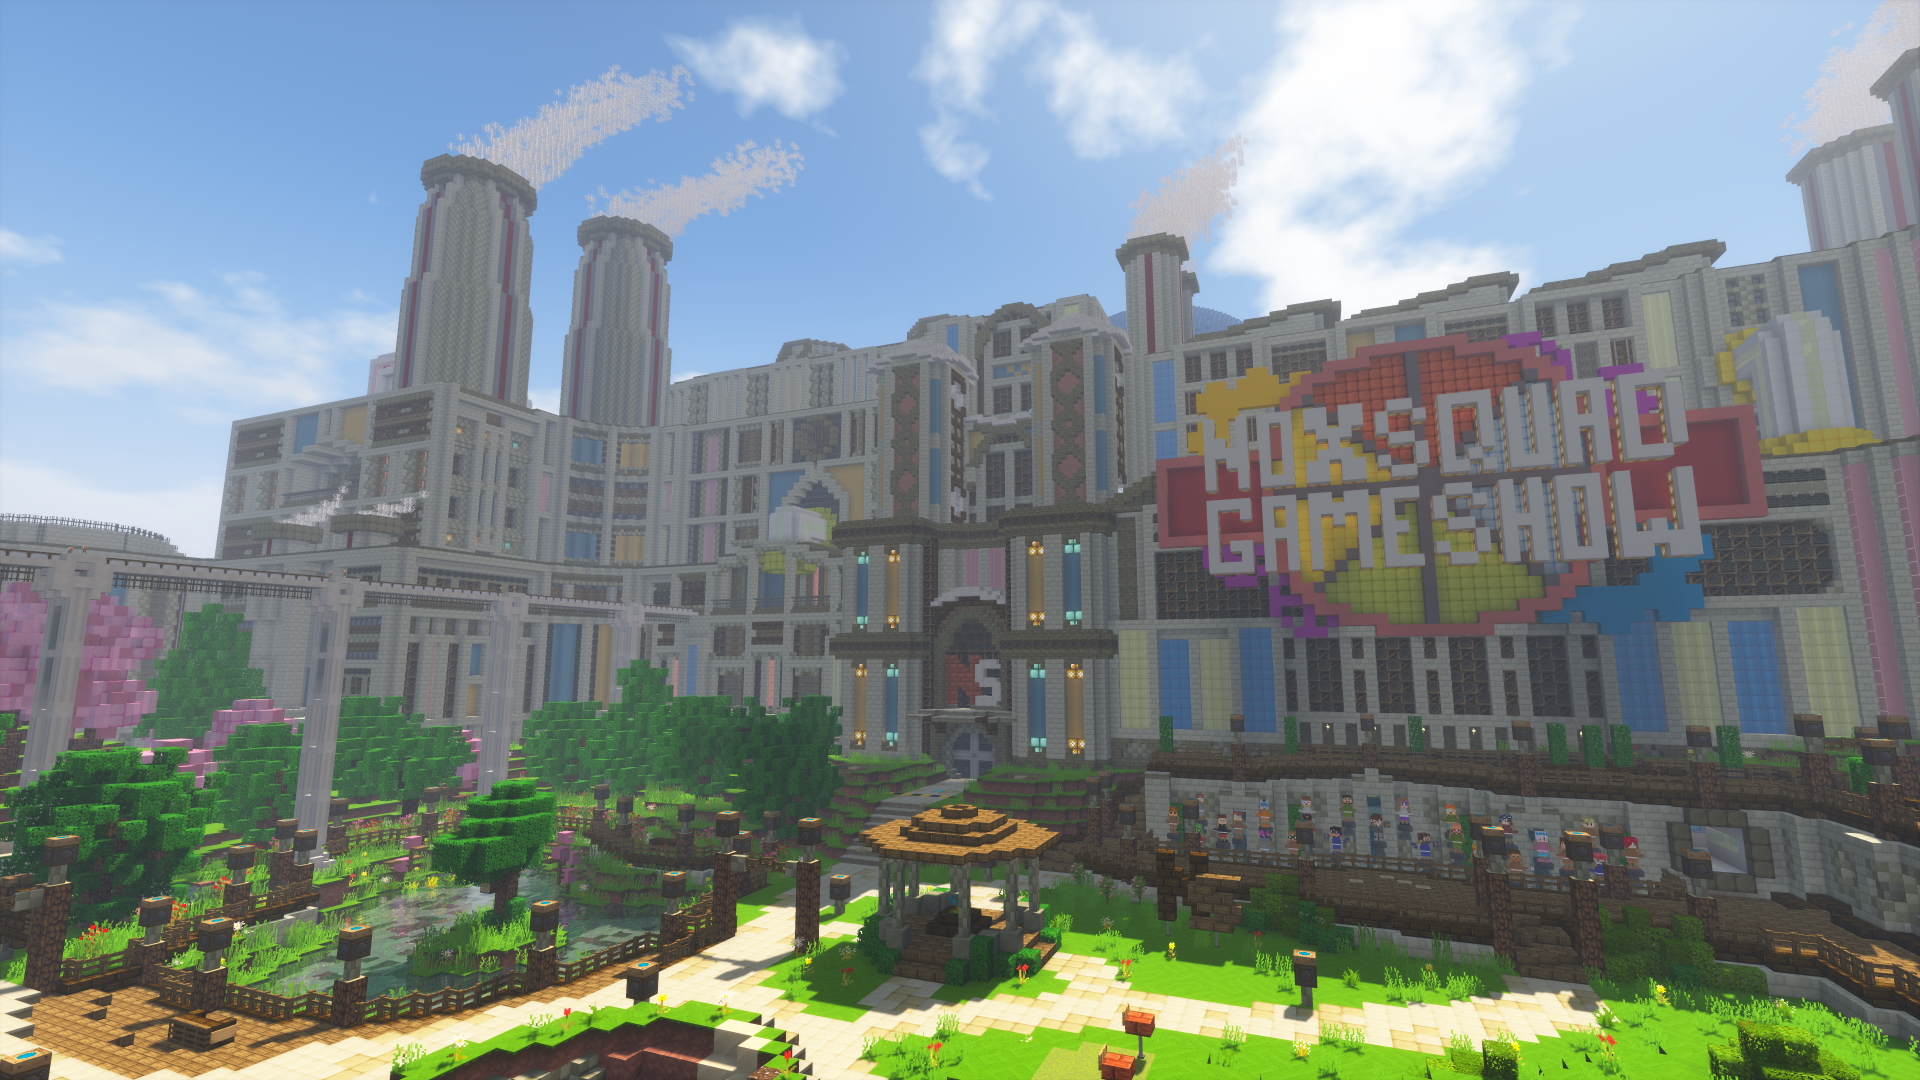 A screenshot within Minecraft of the Noxsquad Gameshow Factory. The logo of the Noxsquad Gameshow is shown many metres tall on the wall of the factory. In front of the factory are gardens, a bandstand, a decking area with statues, and a pond with a tree in the middle of it. The walls of the factory have large pipes coming out of them in various places, and the walls themselves are composed of different panels, many of which are blue and yellow. There are large chimneys on the roof with smoke coming out of them, and the glass roof of the Decision Dome can be seen slightly in the background.